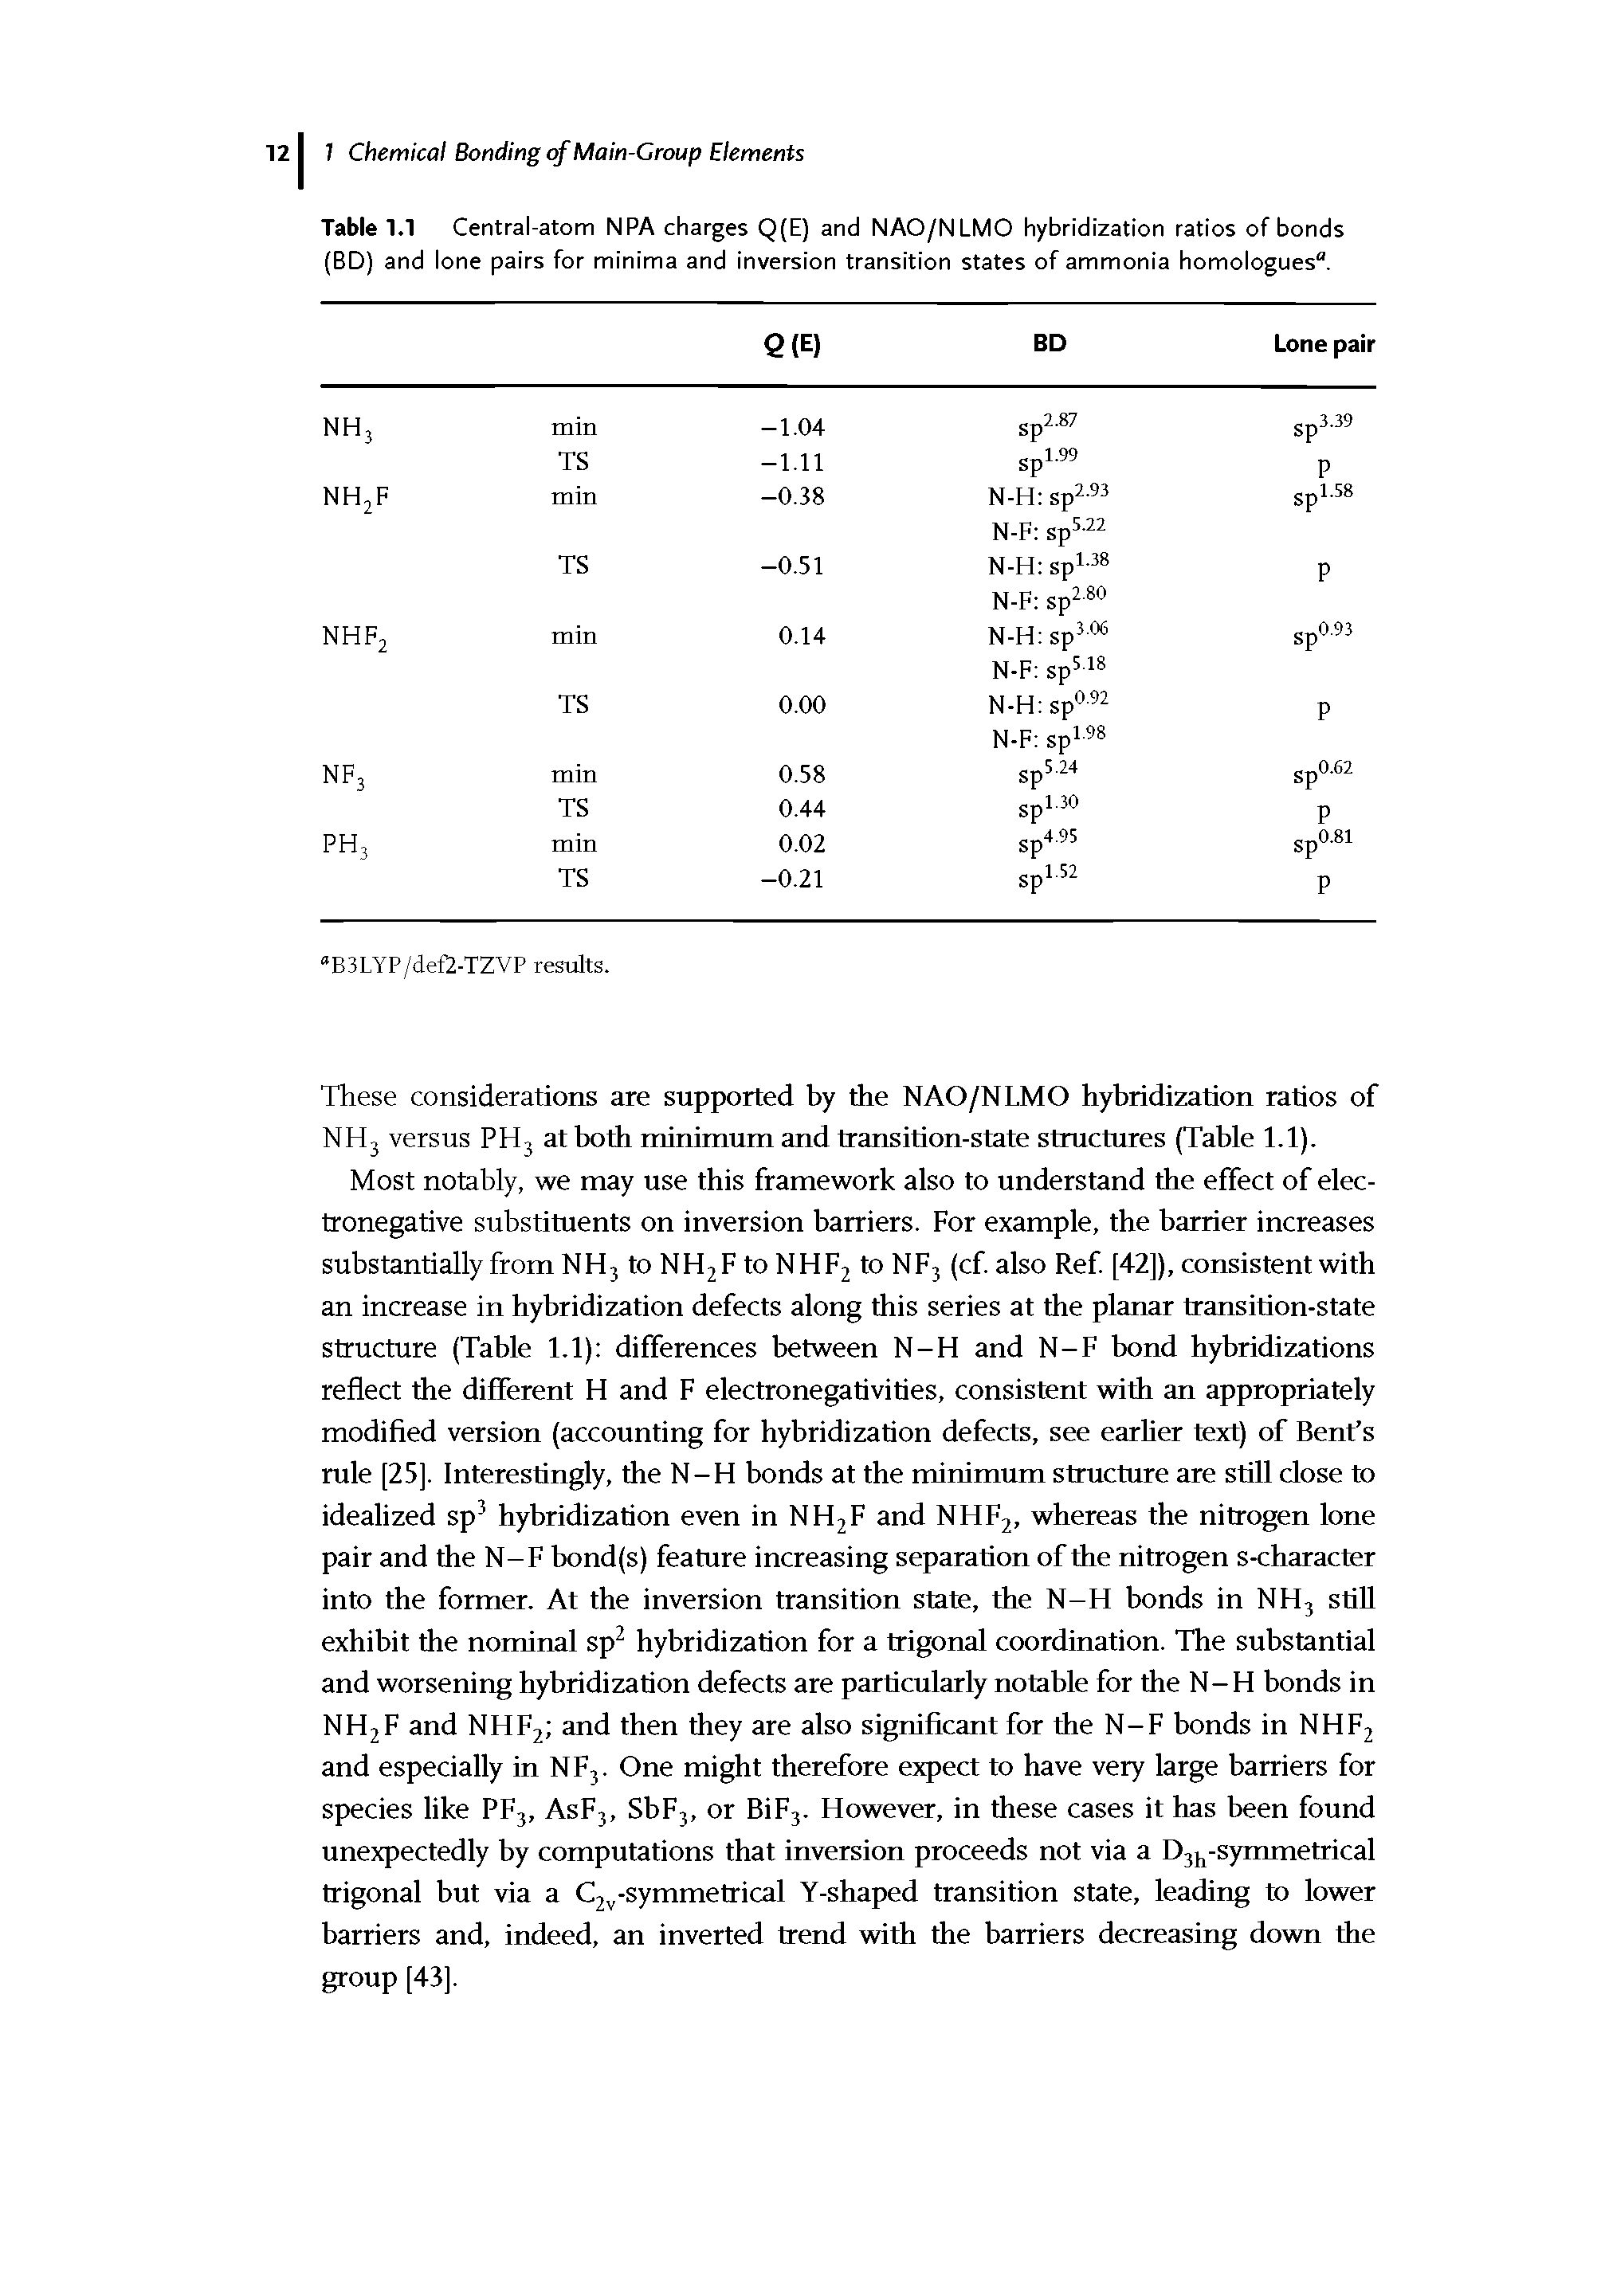 Table 1.1 Central-atom NPA charges Q(E) and NAO/NLMO hybridization ratios of bonds (BD) and lone pairs for minima and inversion transition states of ammonia homologues .